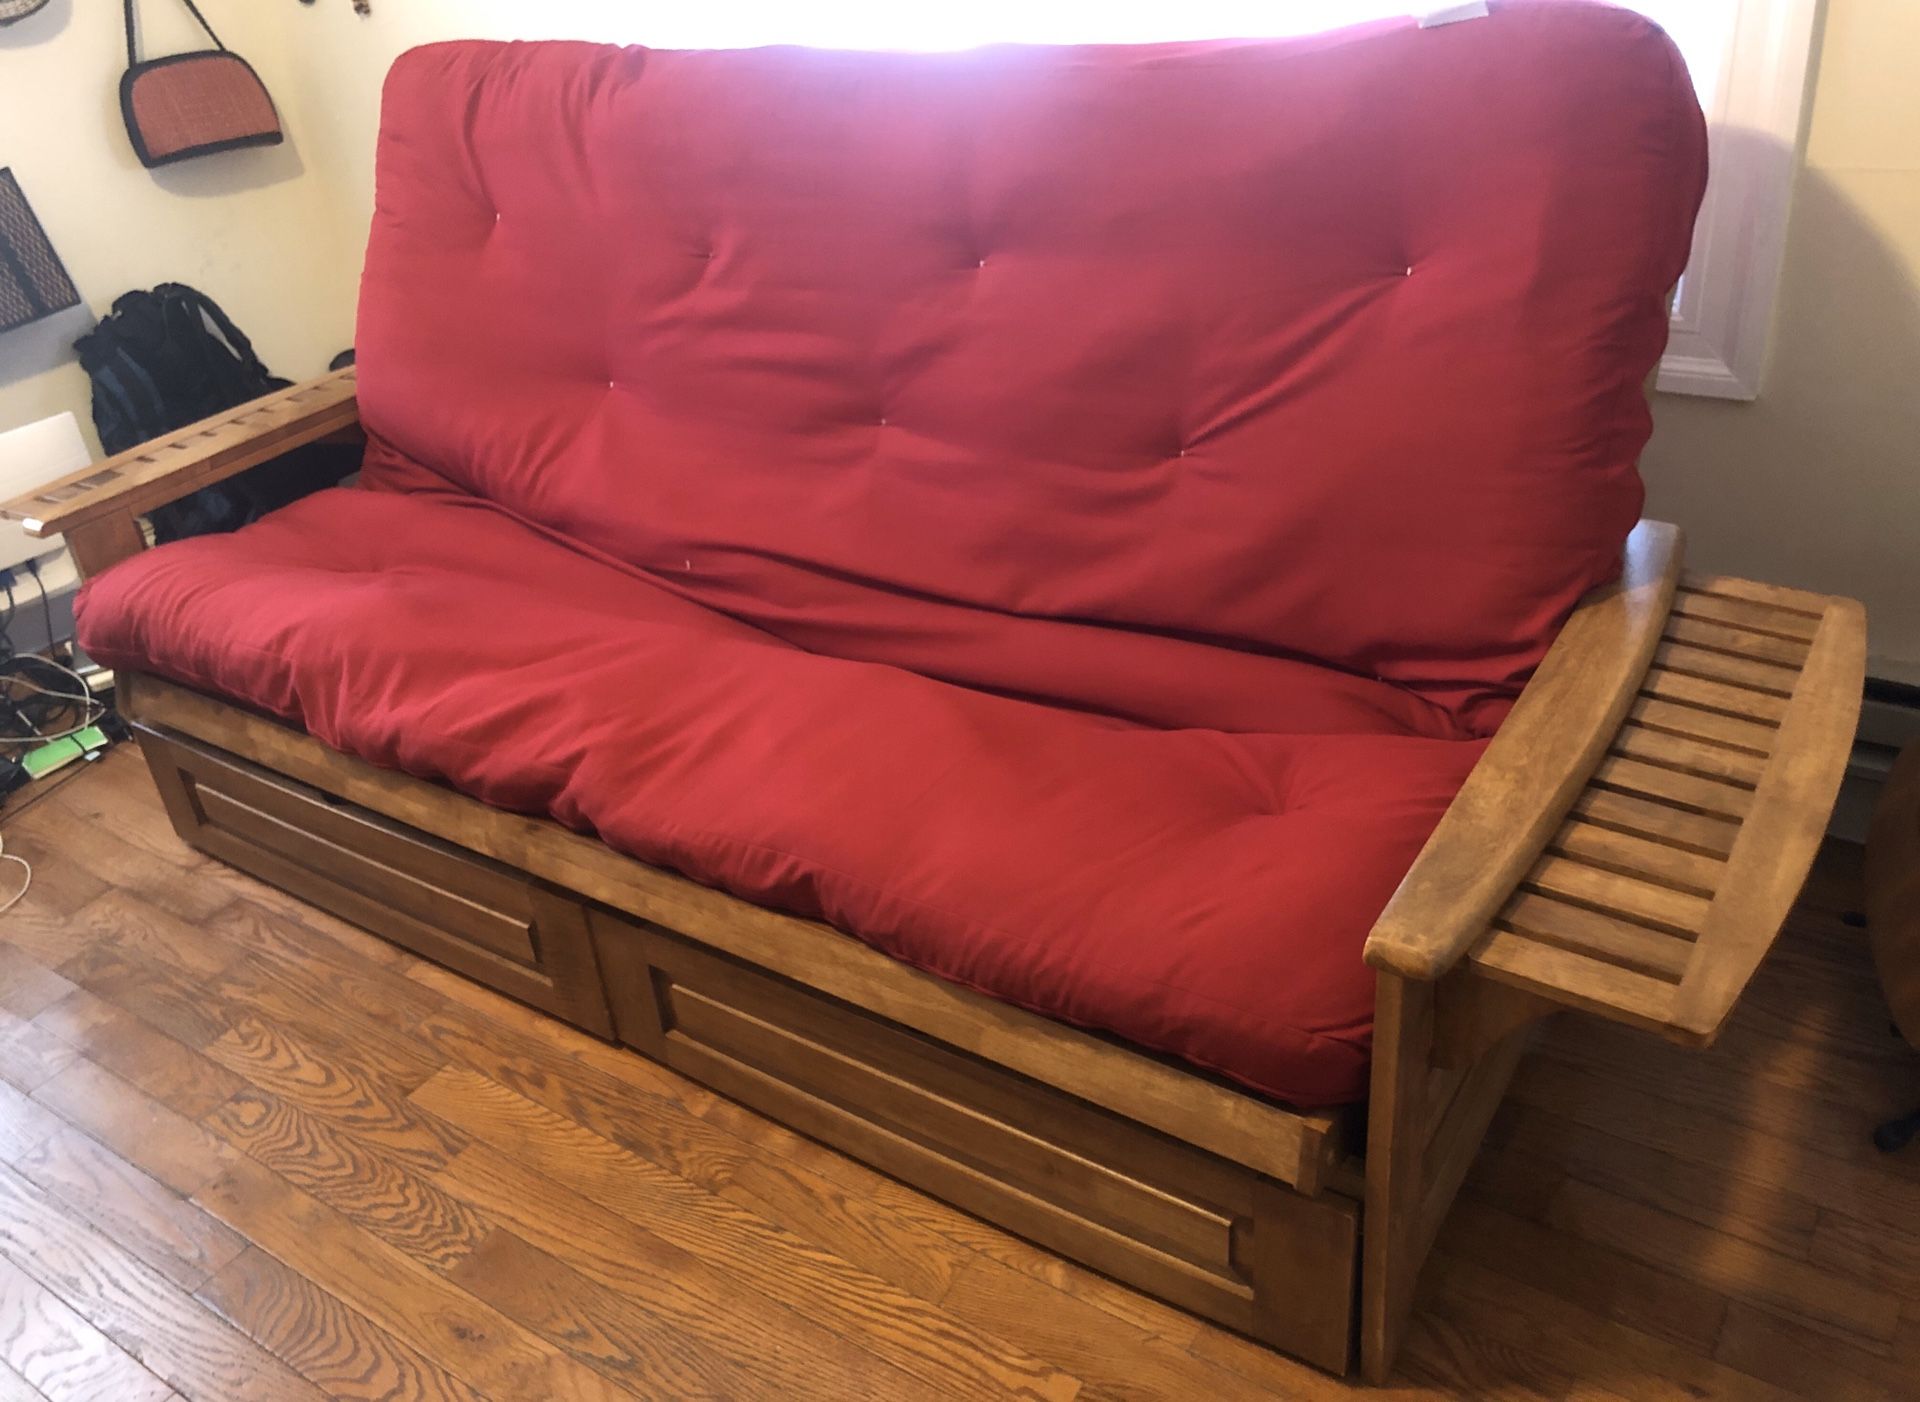 Wooden futon sofa bed with Storage drawers.